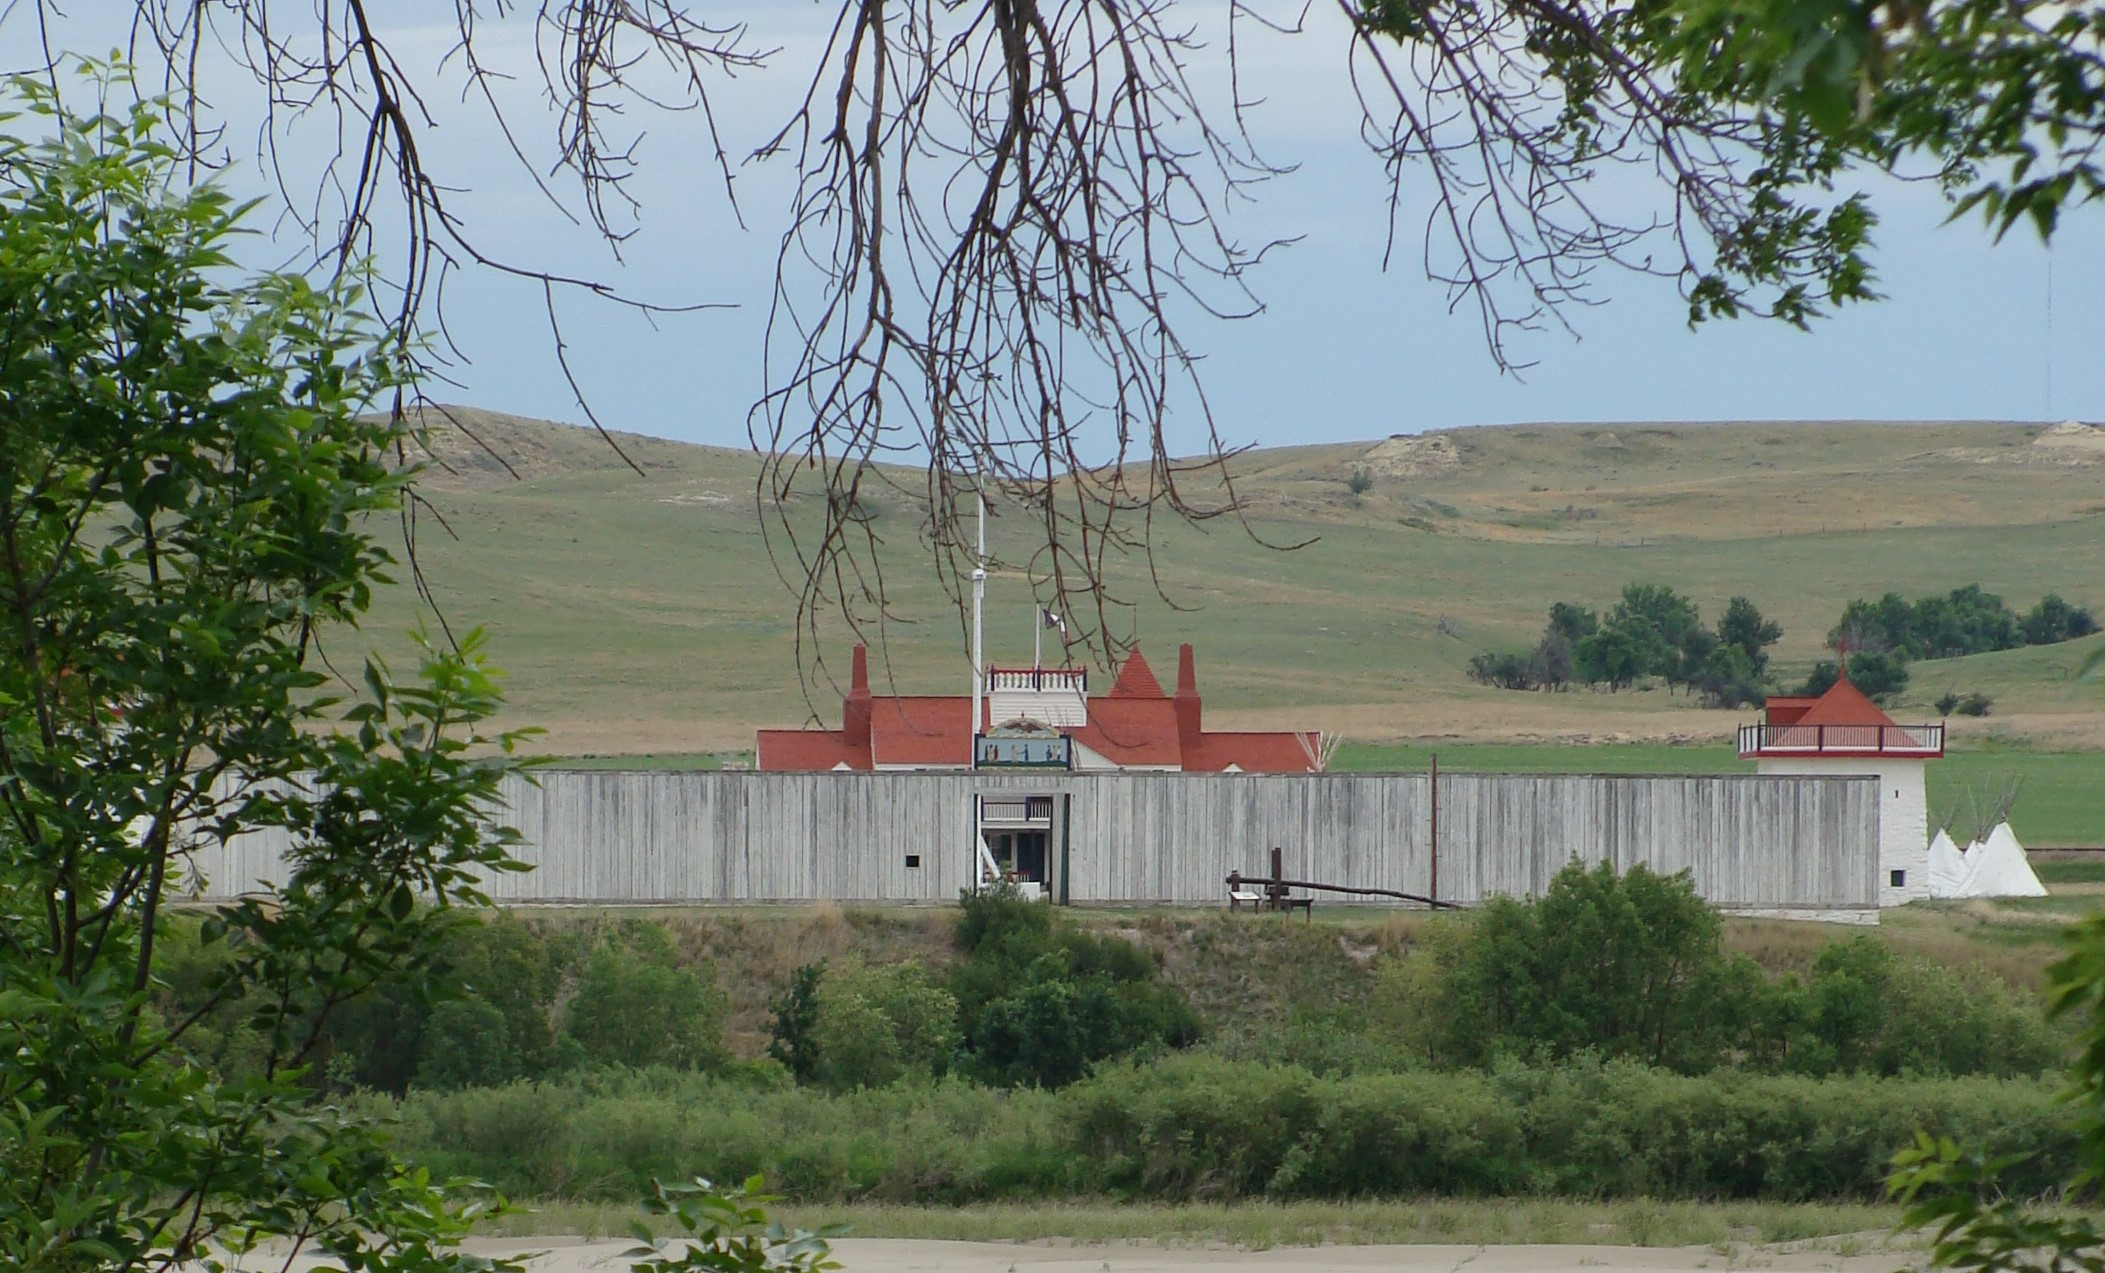 Grey and red wooden fort building among rolling, grassy hills.